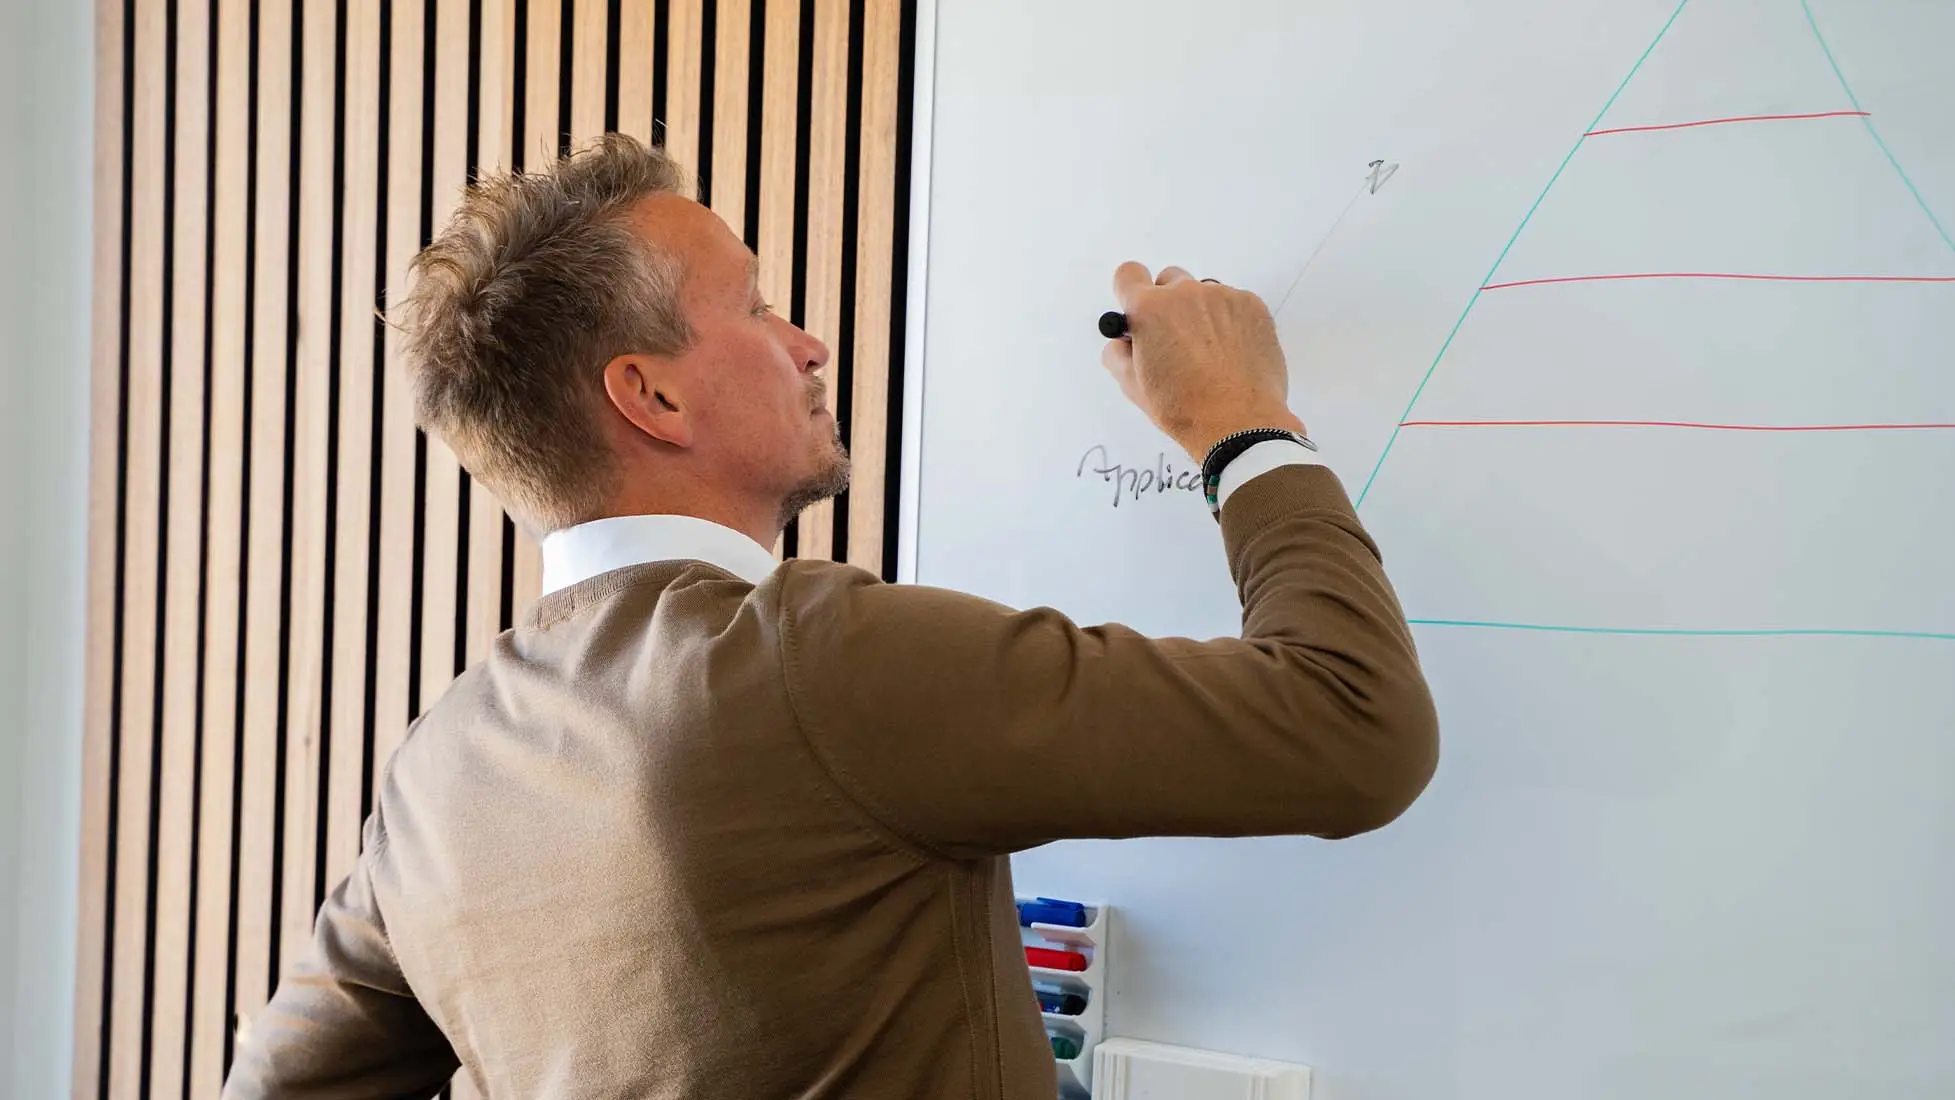 Clever Choice employee explains what ITSM solutions are at a whiteboard